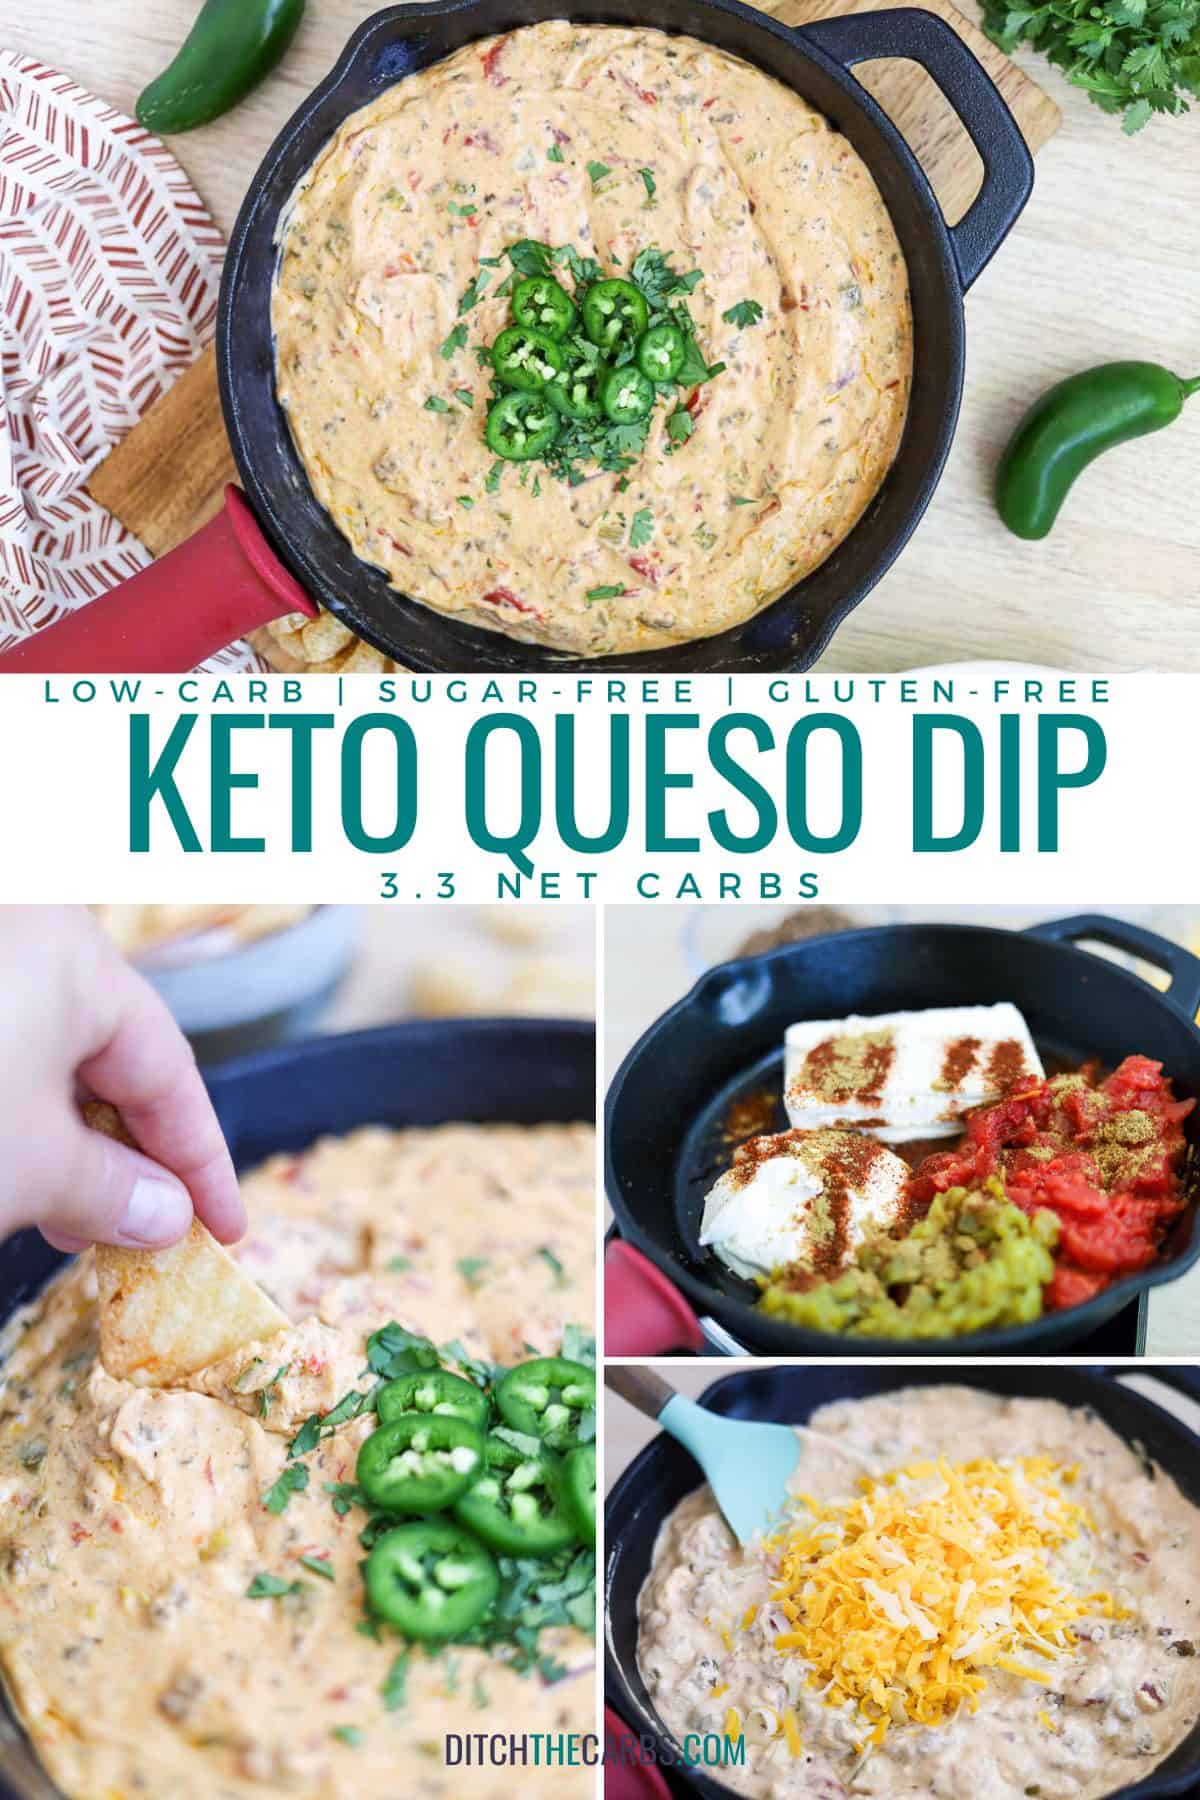 A collage of photos show keto queso dip being made at various stages.